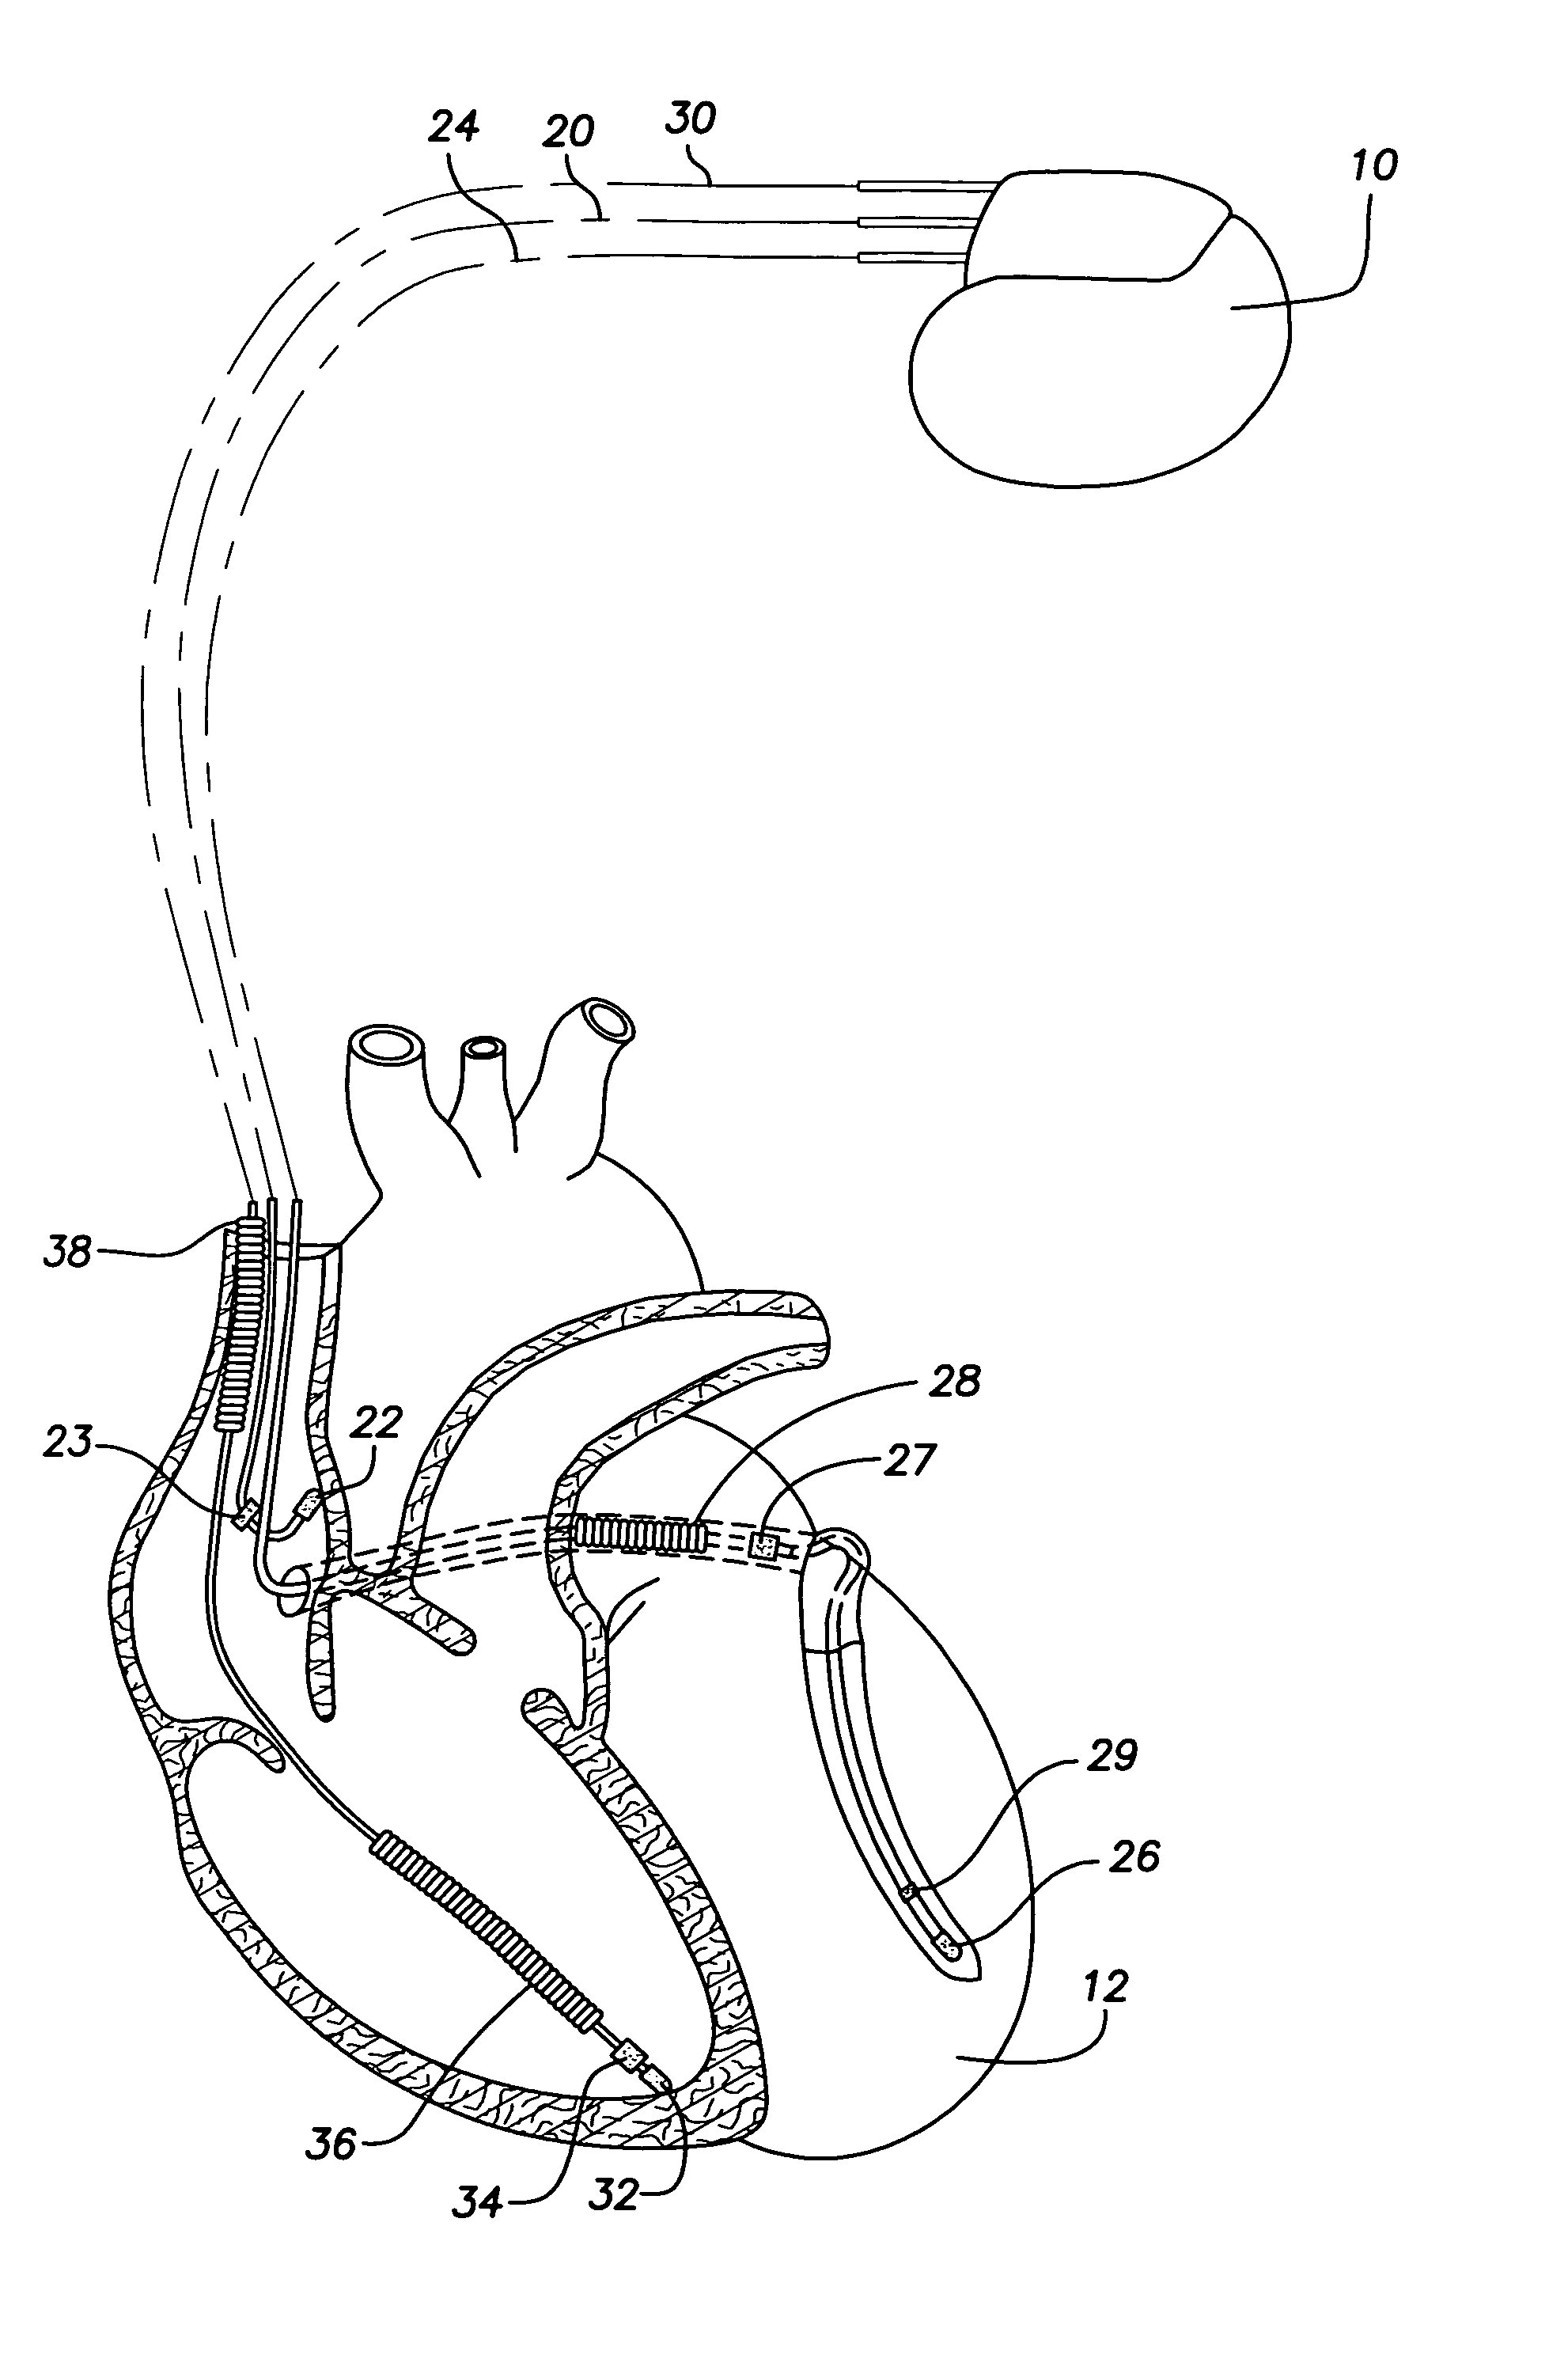 System and method for emulating a surface EKG for use with transtelephonic monitoring of an implantable medical device